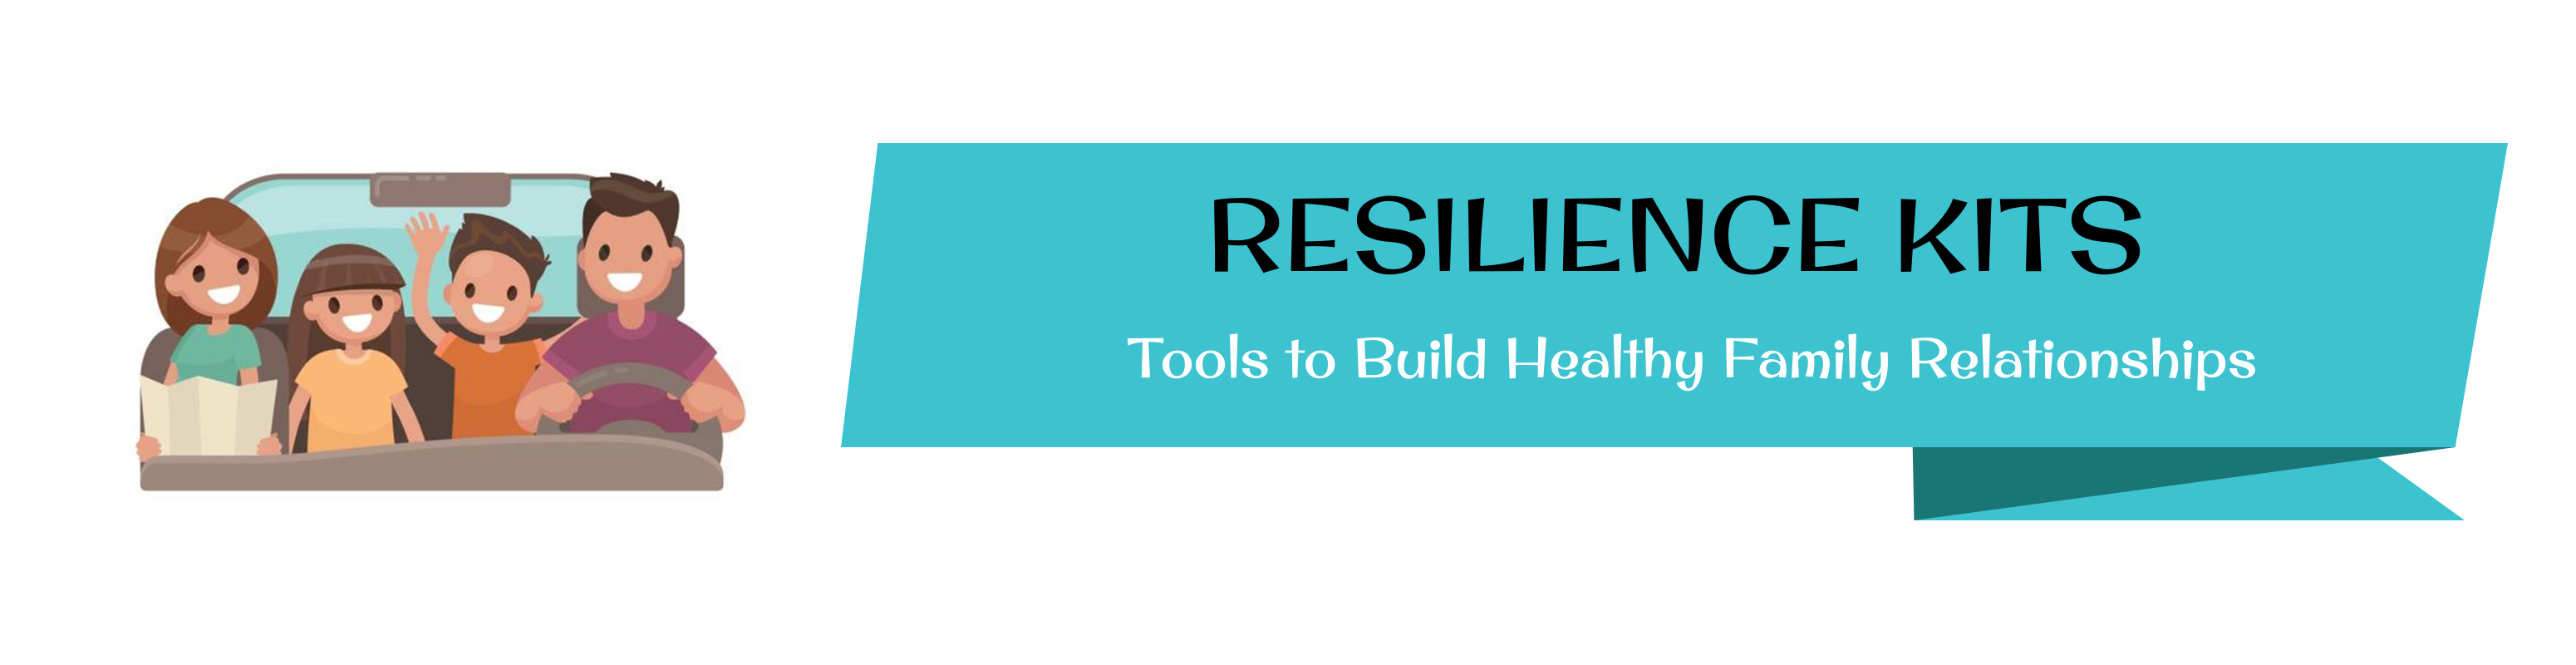 resilience kits: tools to build healthy family relationships